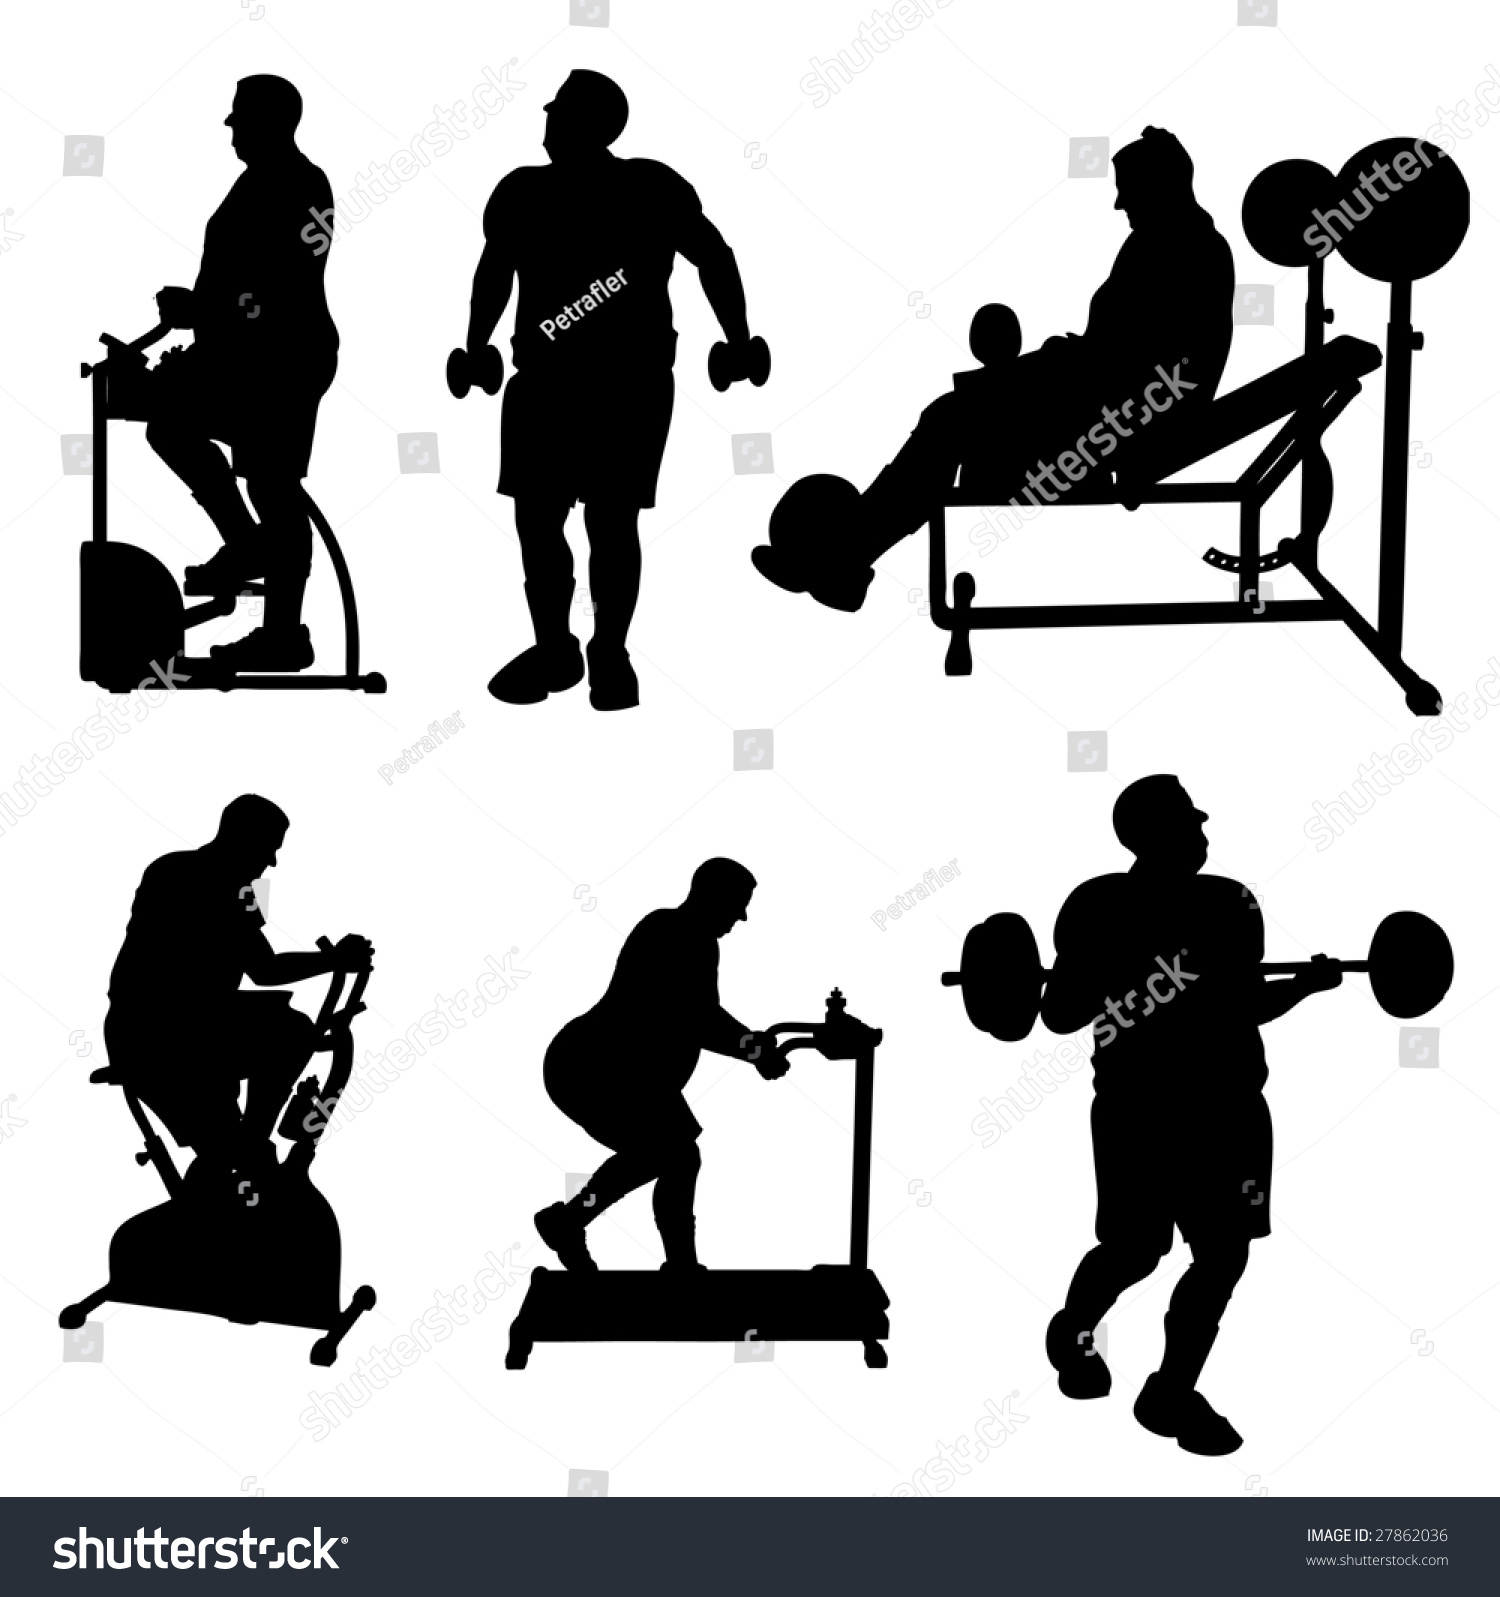 Large Man Exercise Bitmap Silhouettes Stock Photo 27862036 : Shutterstock